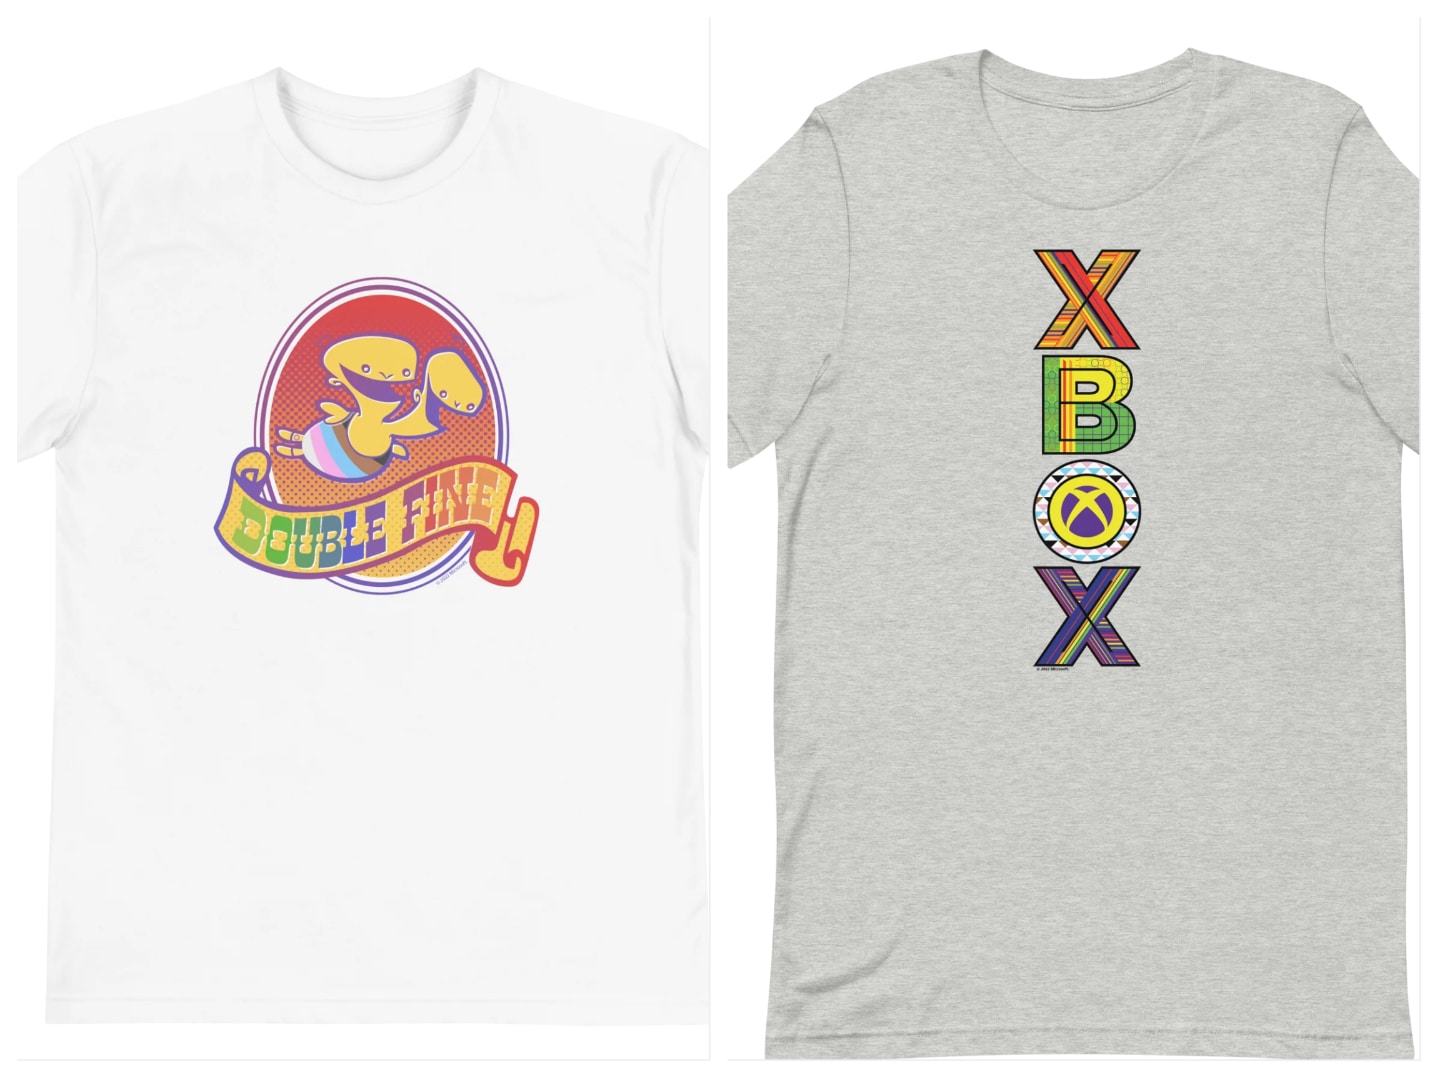 The t-shirt range features the Xbox logo in Pride flag colours and designs inspired by popular games.